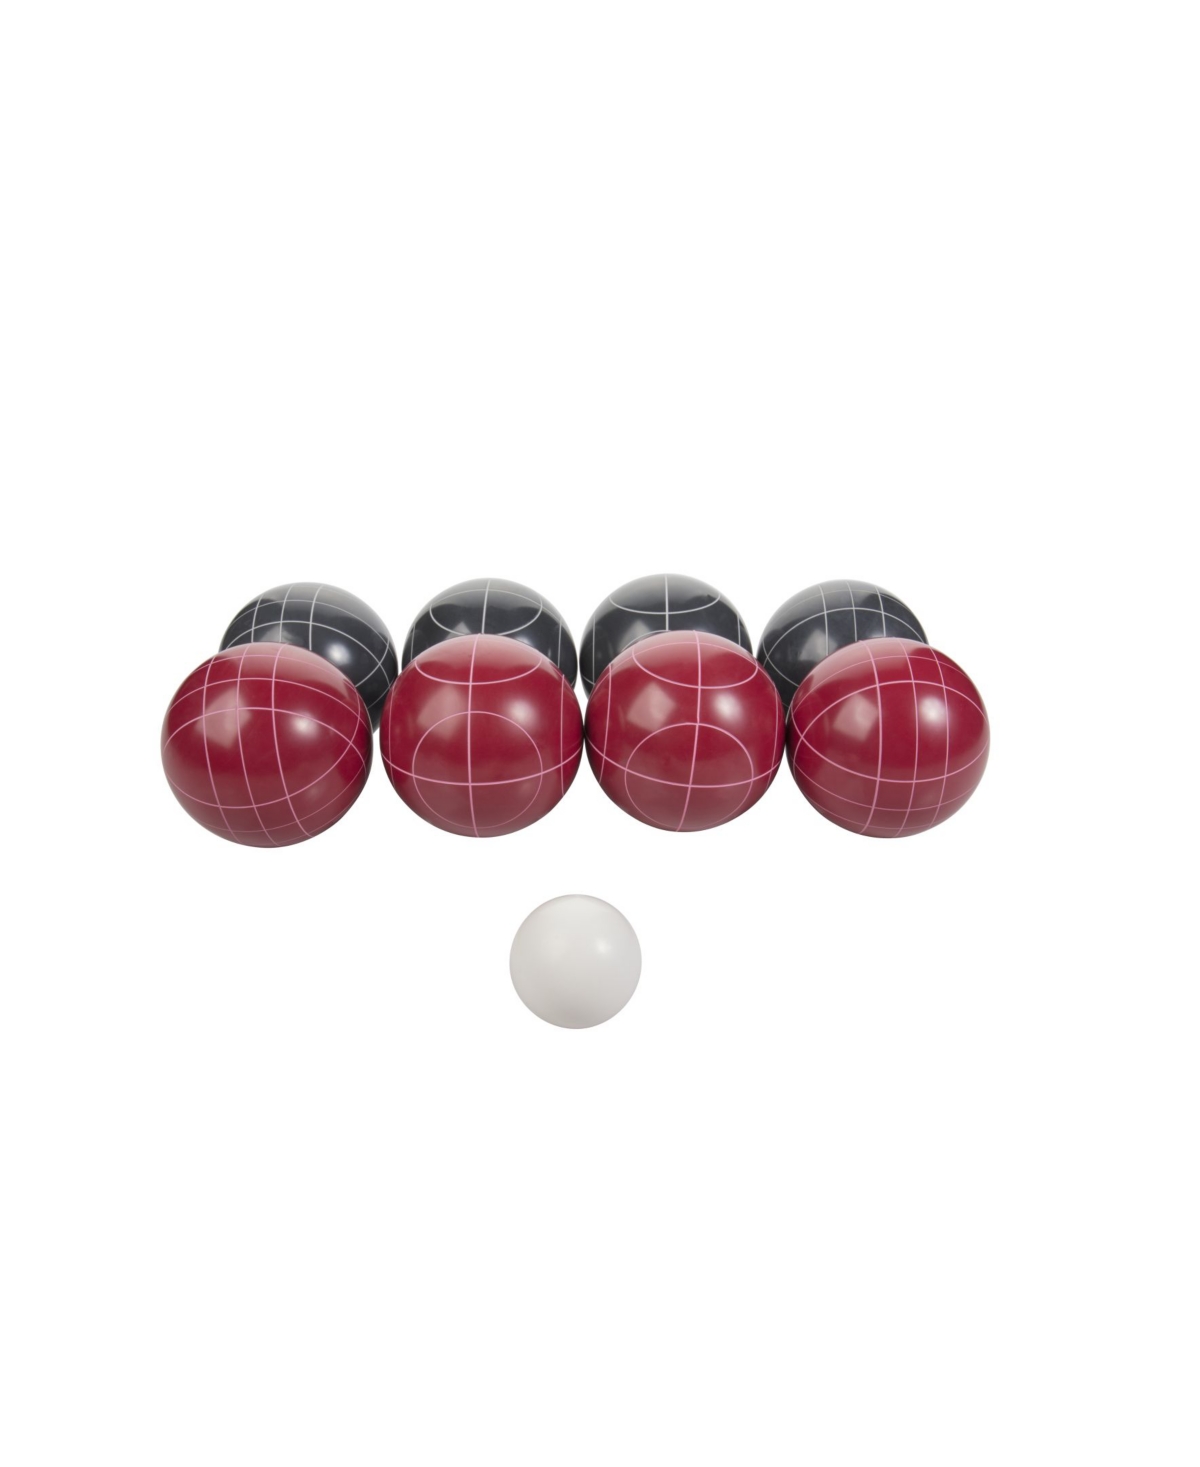 Viva Sol Kids' Triumph Competition 100 Mm Resin Bocce Ball Outdoor Game Set With Carrying Bag For Easy Storage In Multi